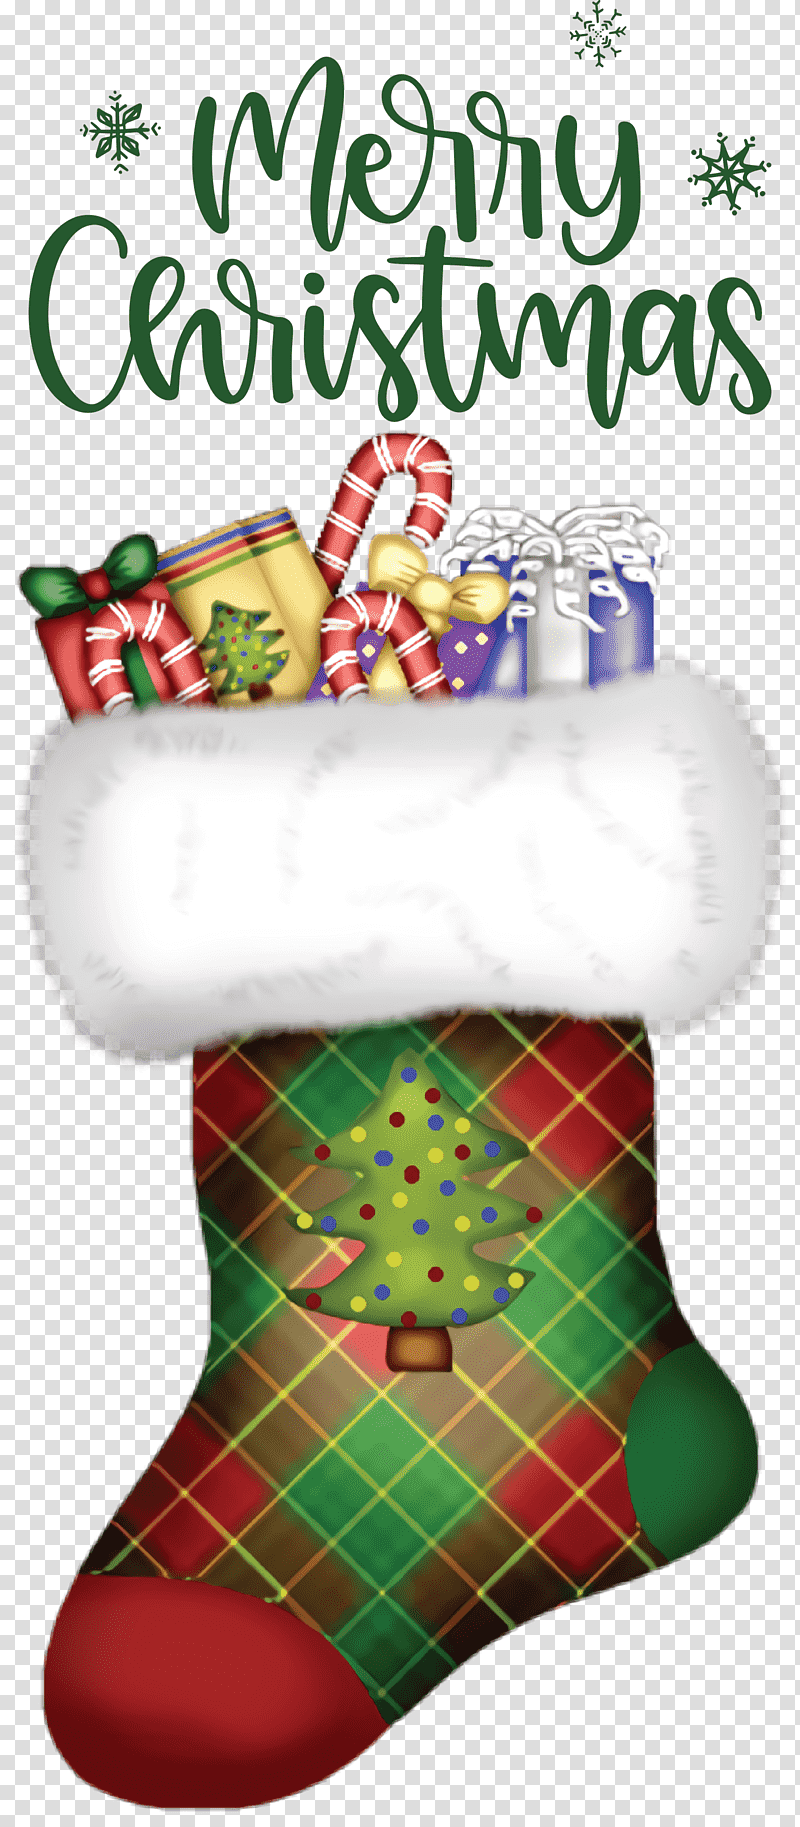 Merry Christmas Christmas Day Xmas, Chicken, Chicken Coop, Pen, Christmas Ornament M, Christmas ing, Internet Meme transparent background PNG clipart